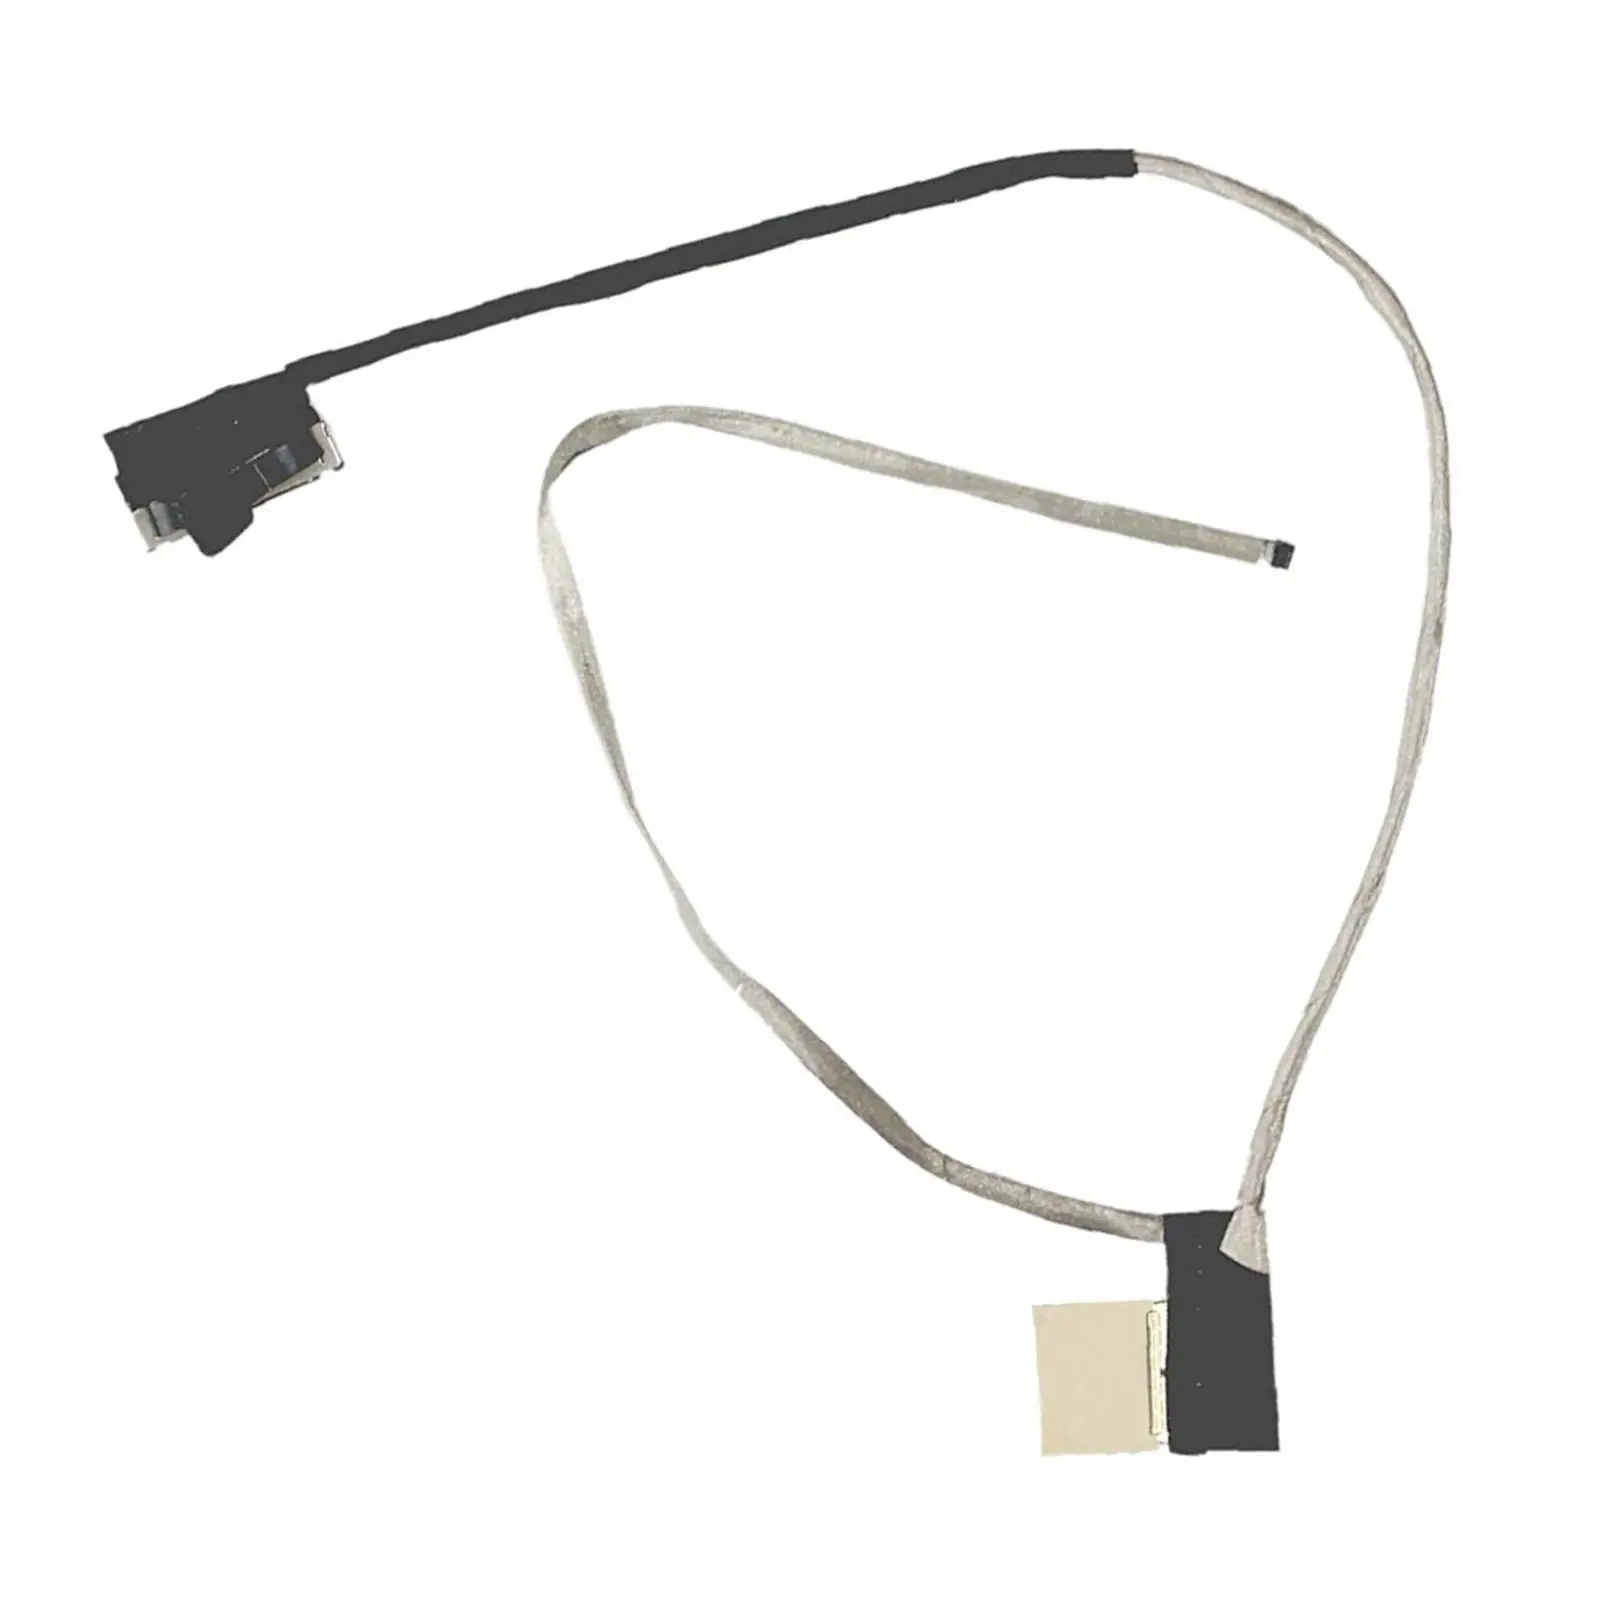 Professional LCD Lvds Display Cable Replacement for VX15 50.GM1N2.008 DC02002QL00 High Performance Easy to Install